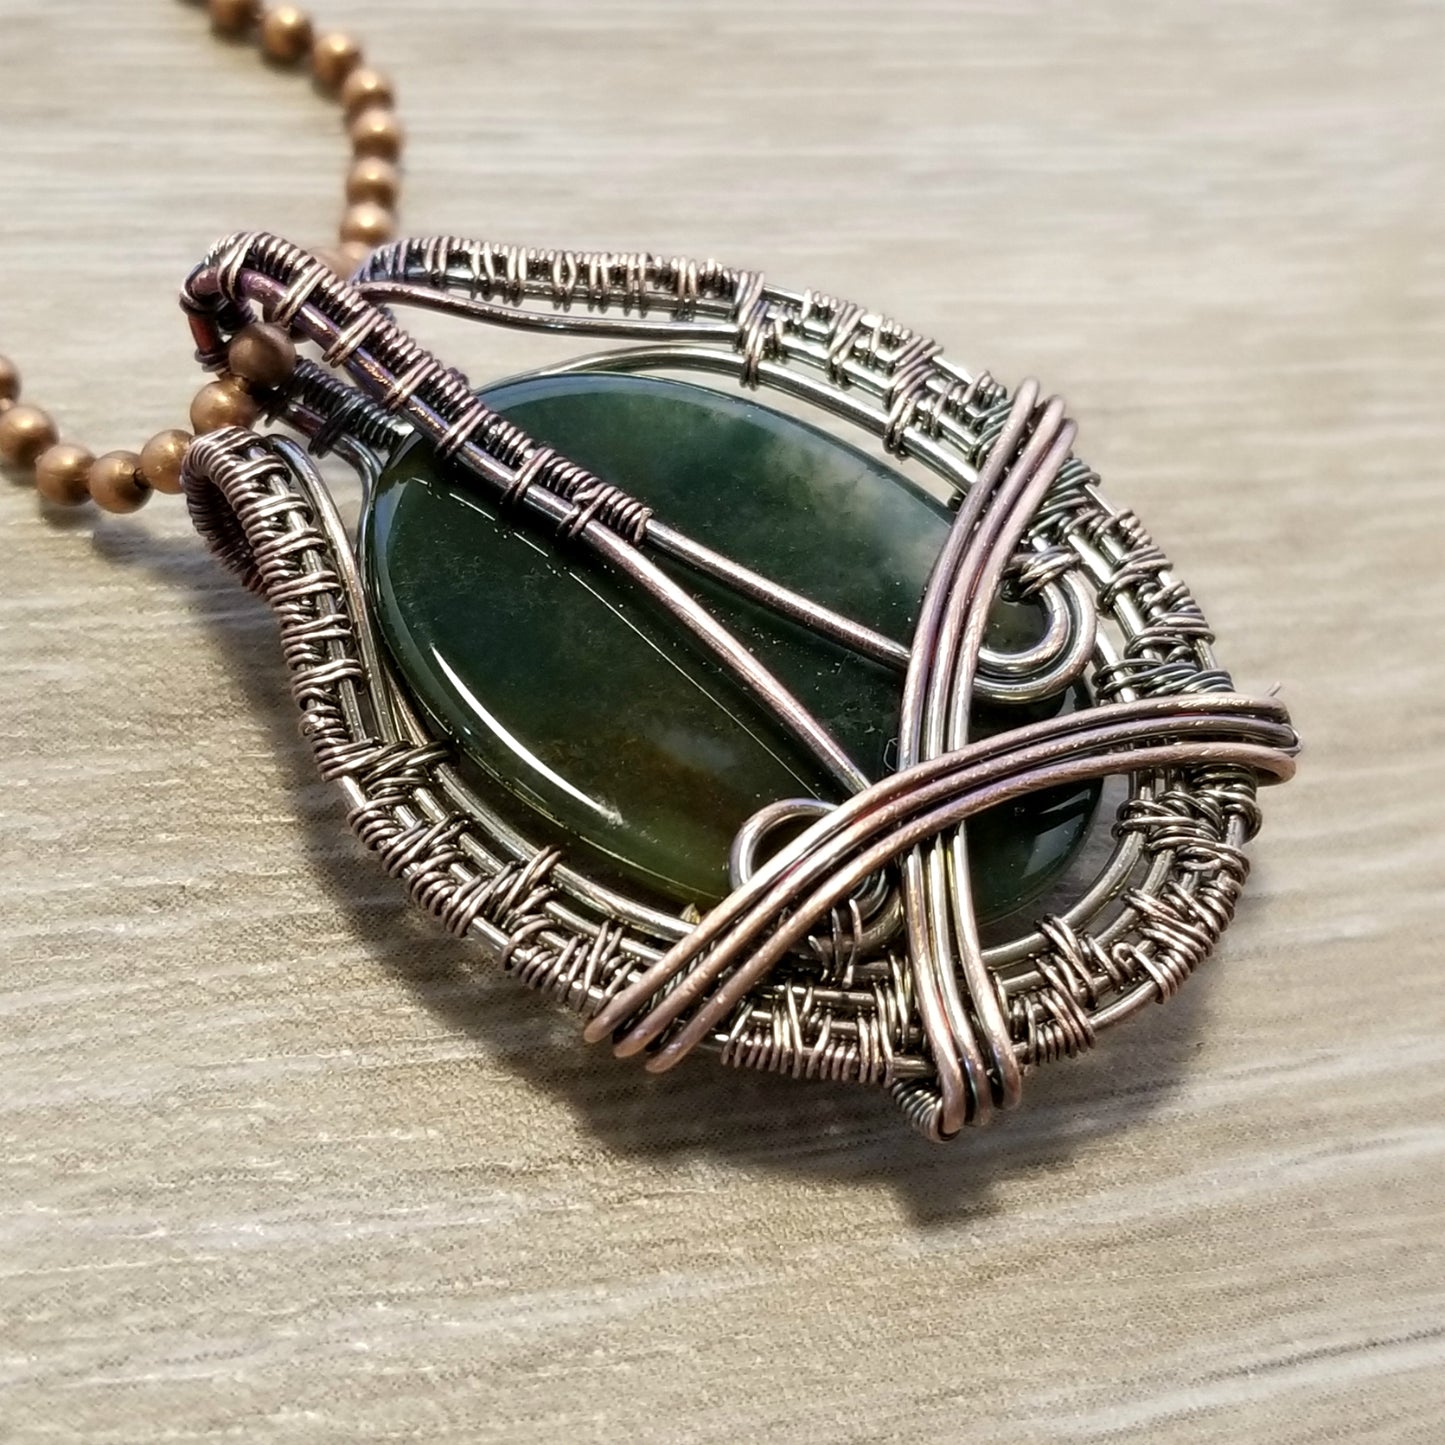 Wire Woven Stone Necklace, Agate Pendant, Indian Agate Jewelry